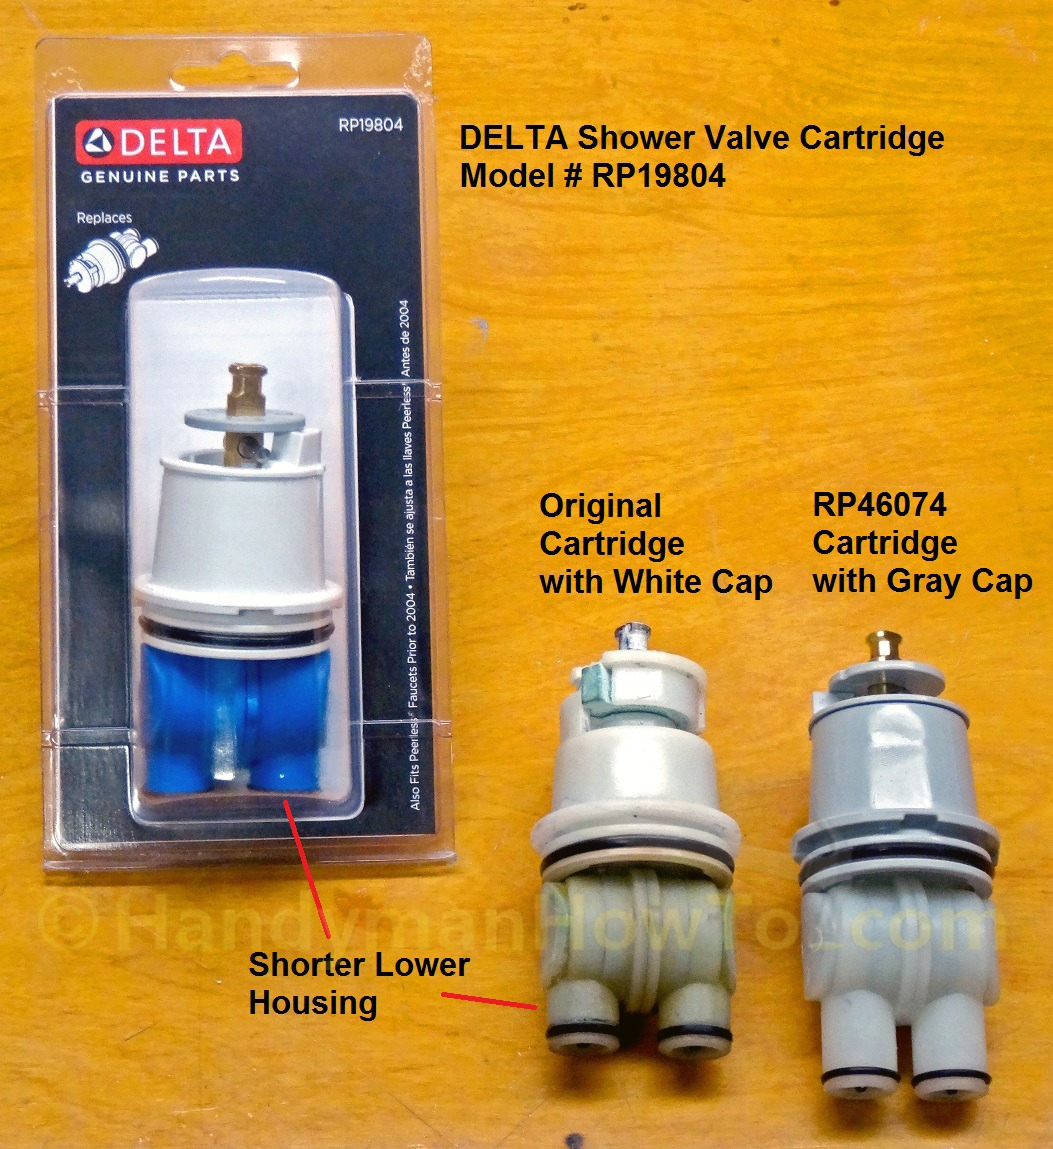 Delta Single Handle Shower Faucet Repair Diagram How To Replace A Leaky Shower Valve Cartridge